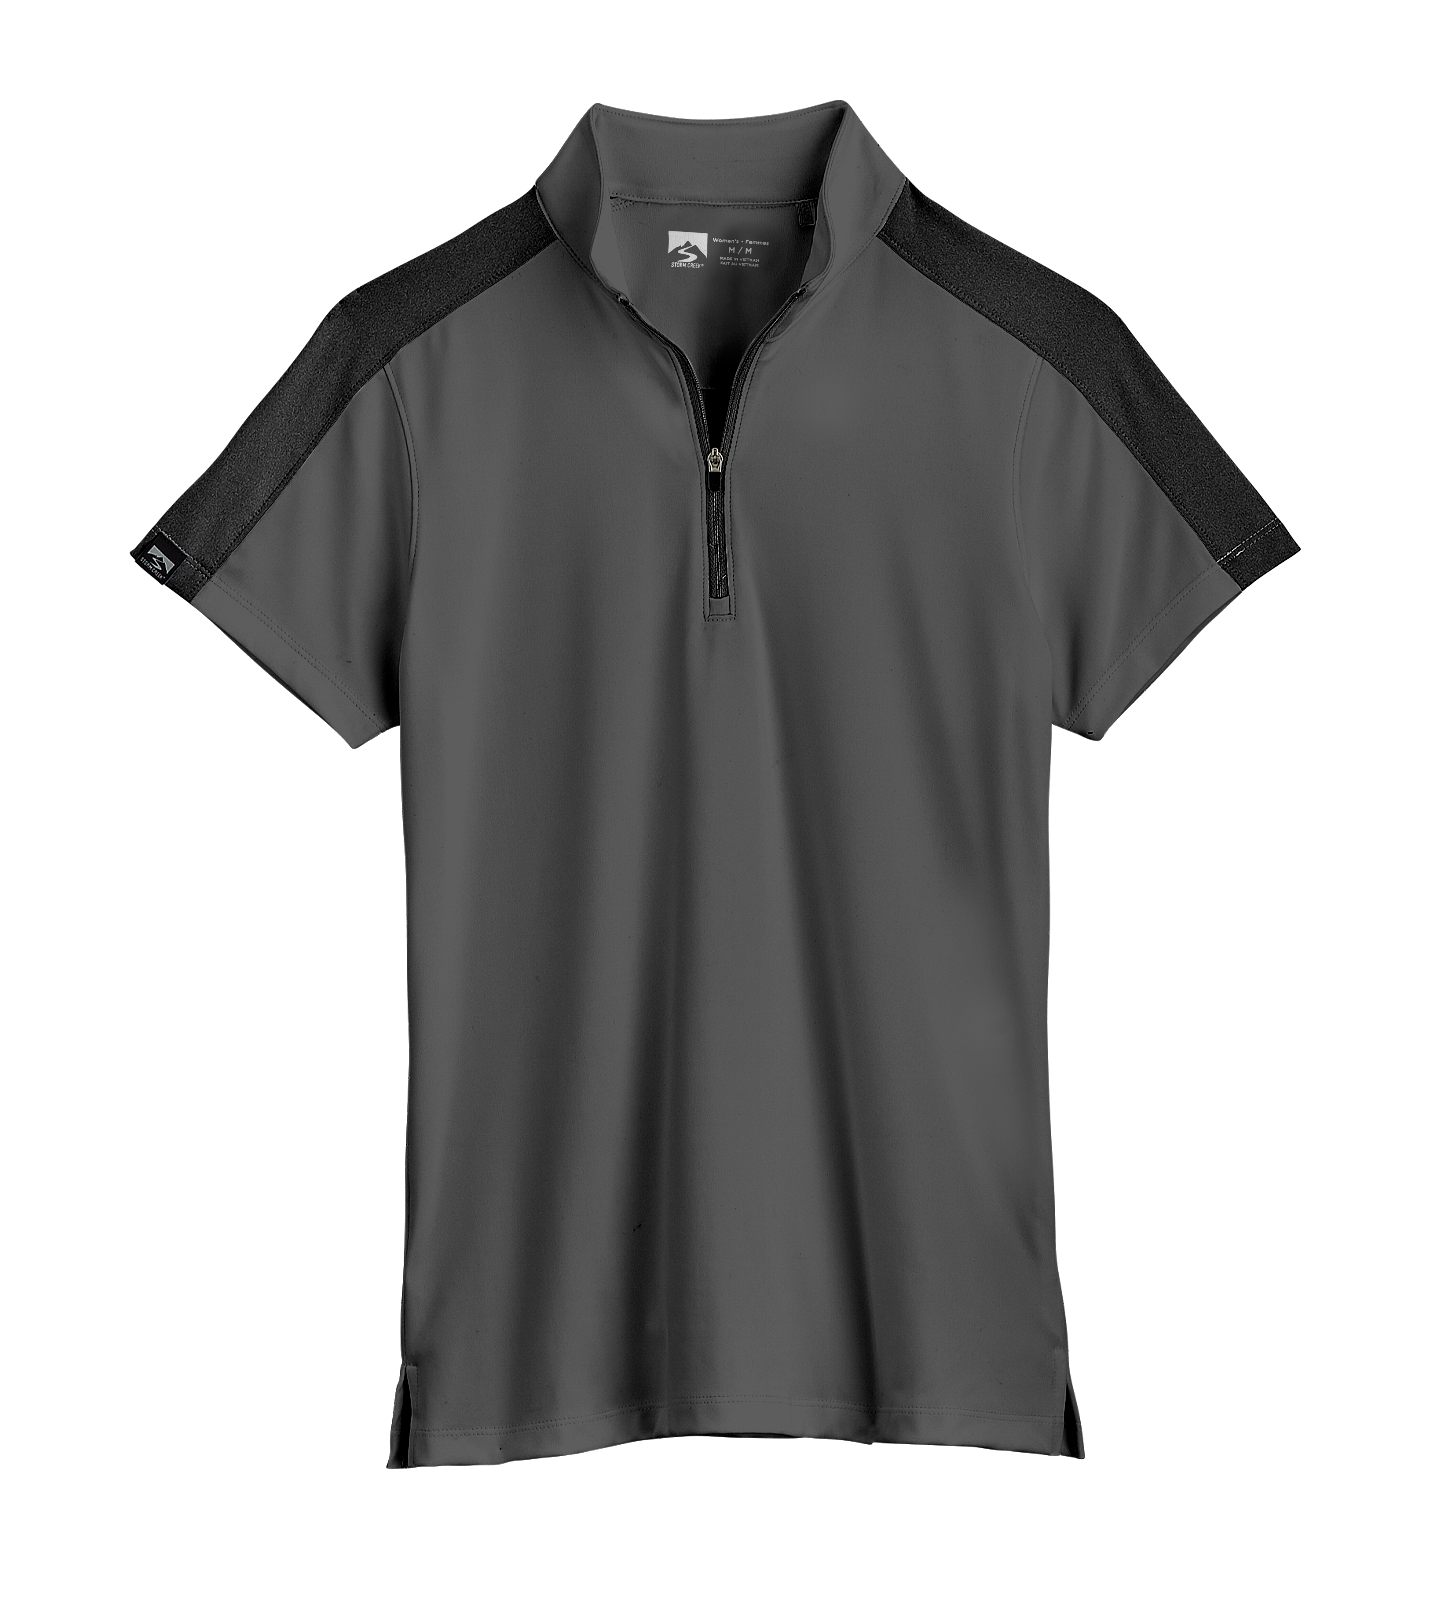 Storm Creek Activator Short-Sleeve Polo Shirt for Ladies